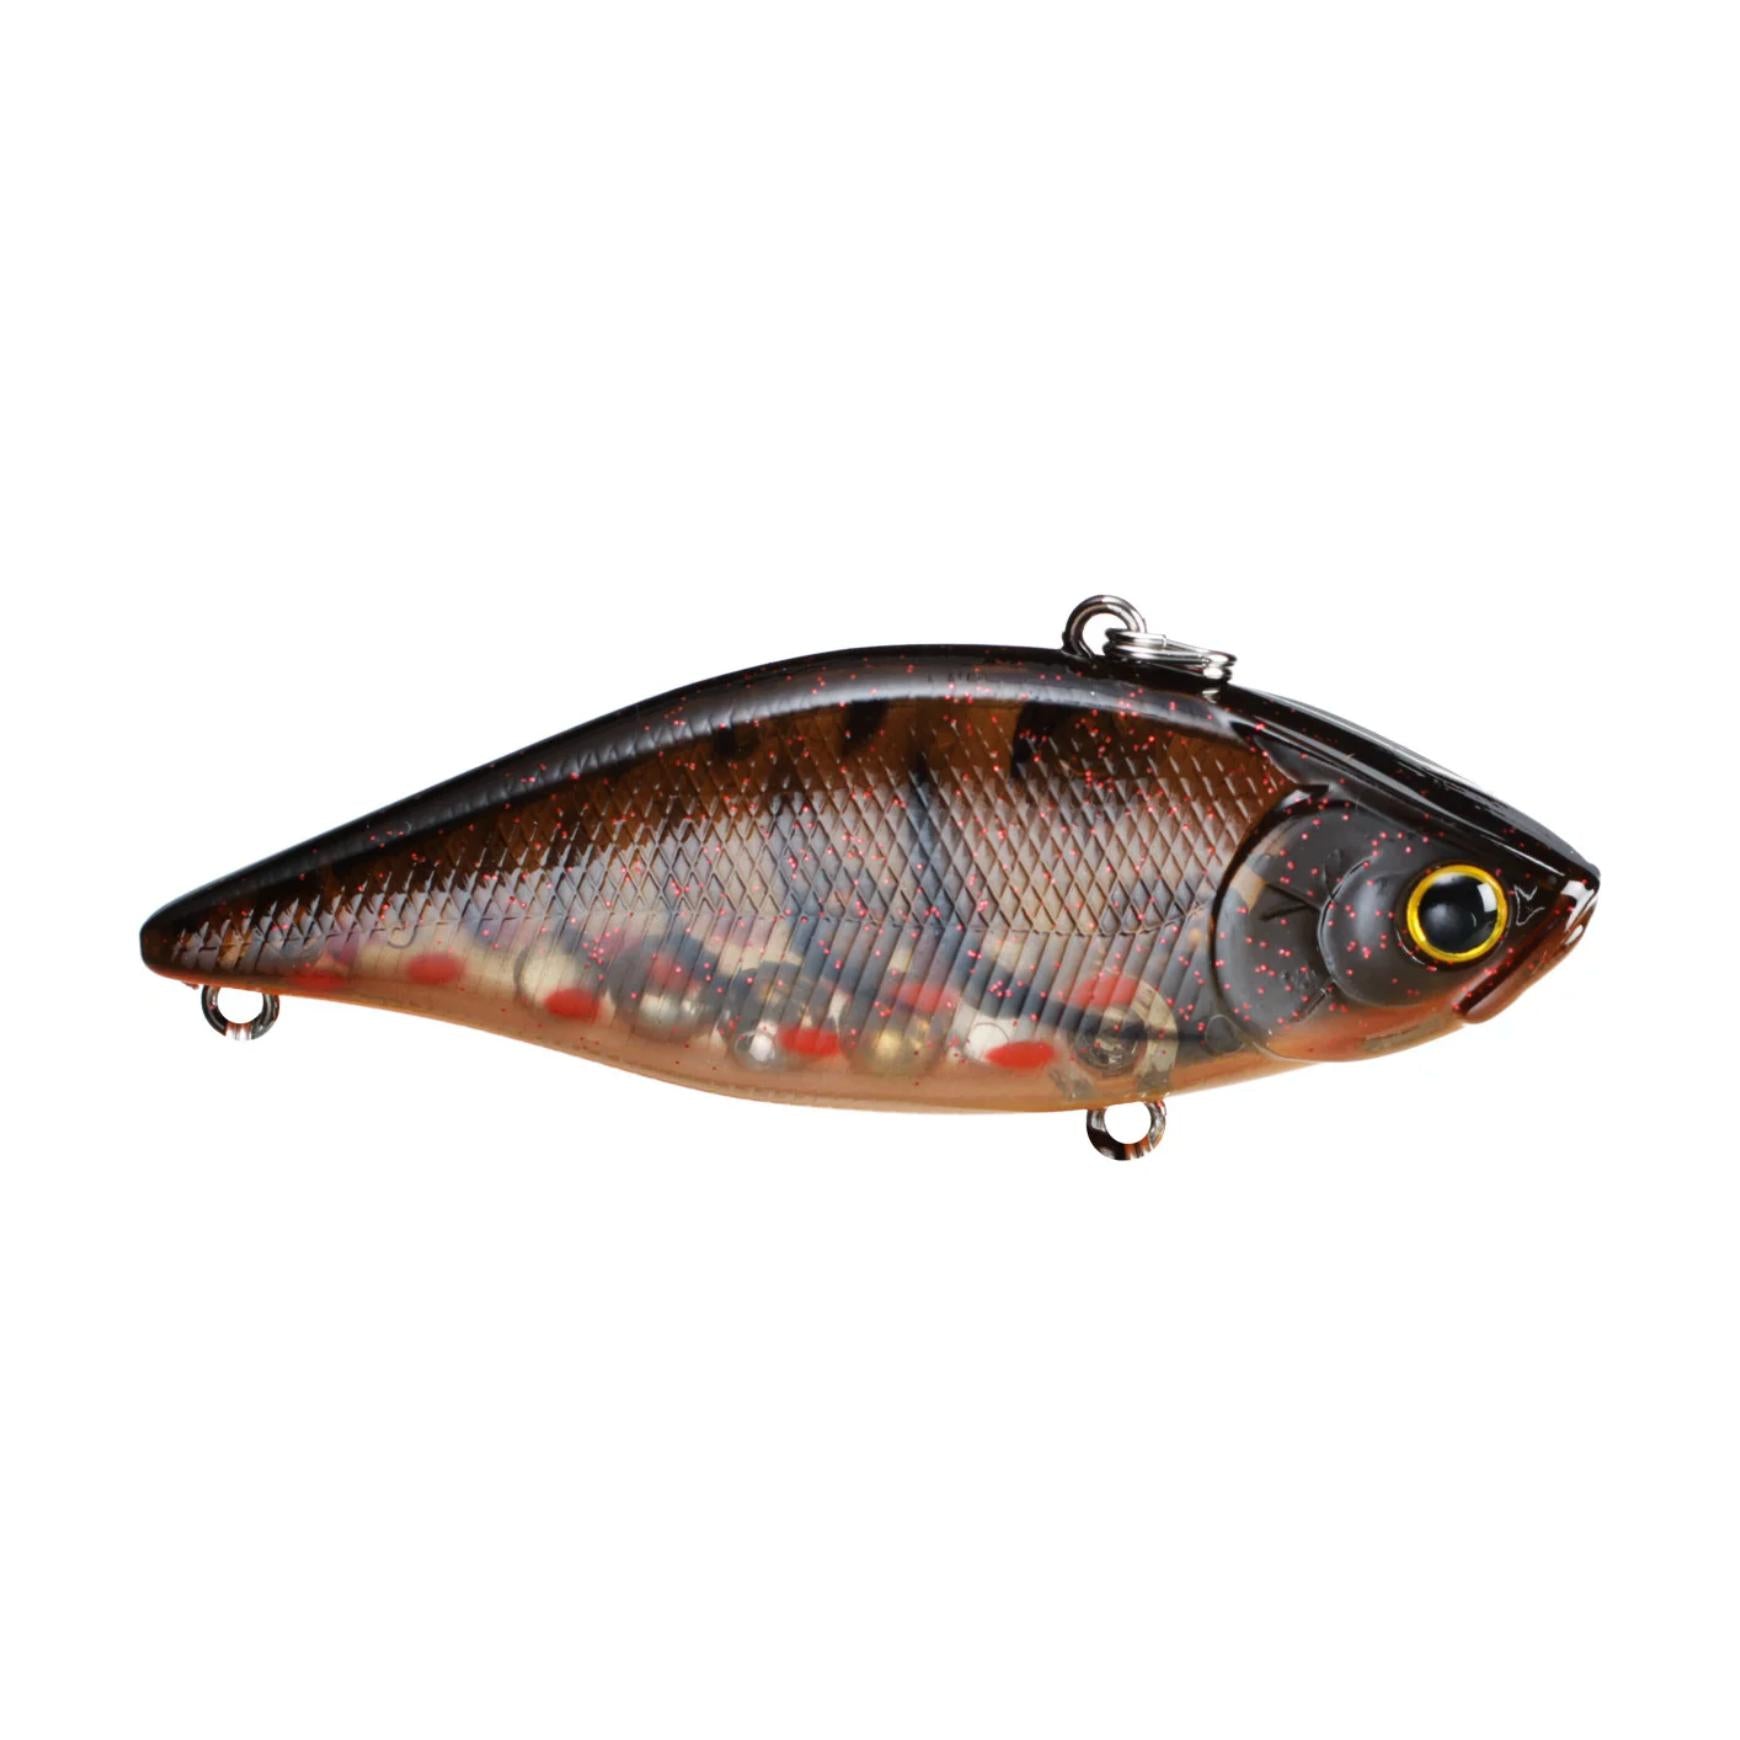 Lucky Craft LV 500 Max Lipless Crankbait Be Gill